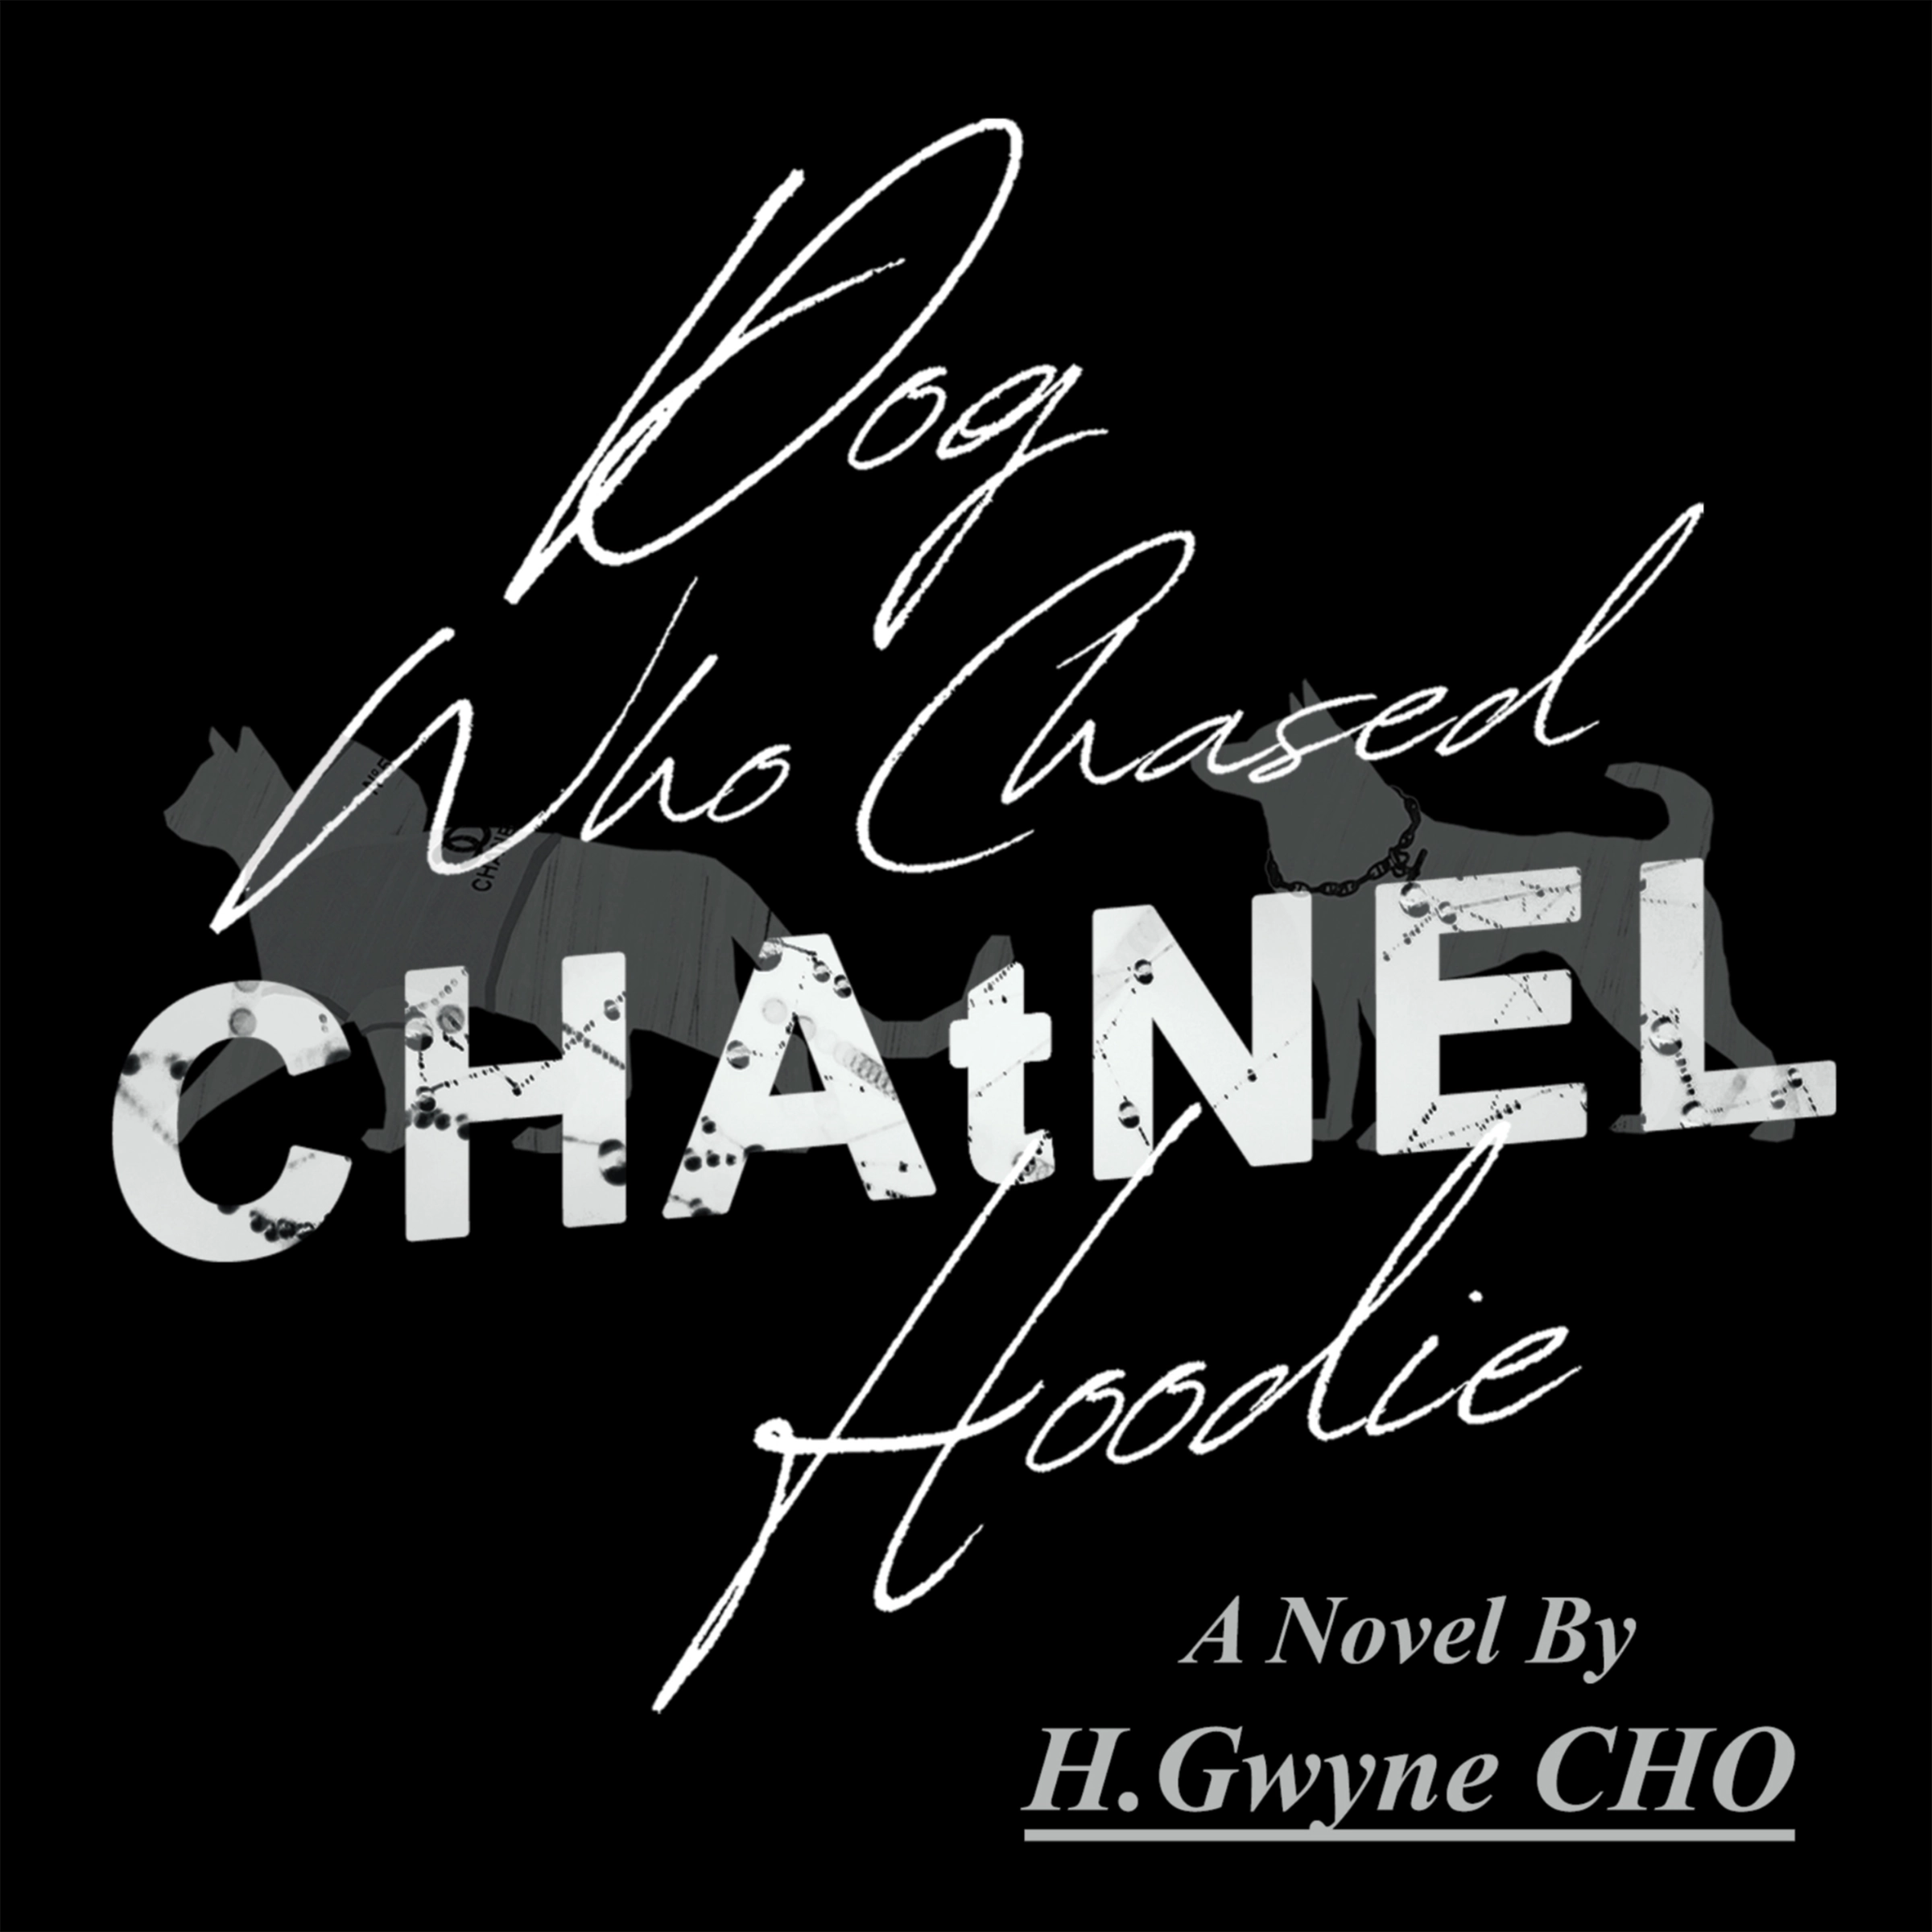 Dog Who Chased CHAtNEL Hoodie by H.Gwyne CHO Audiobook